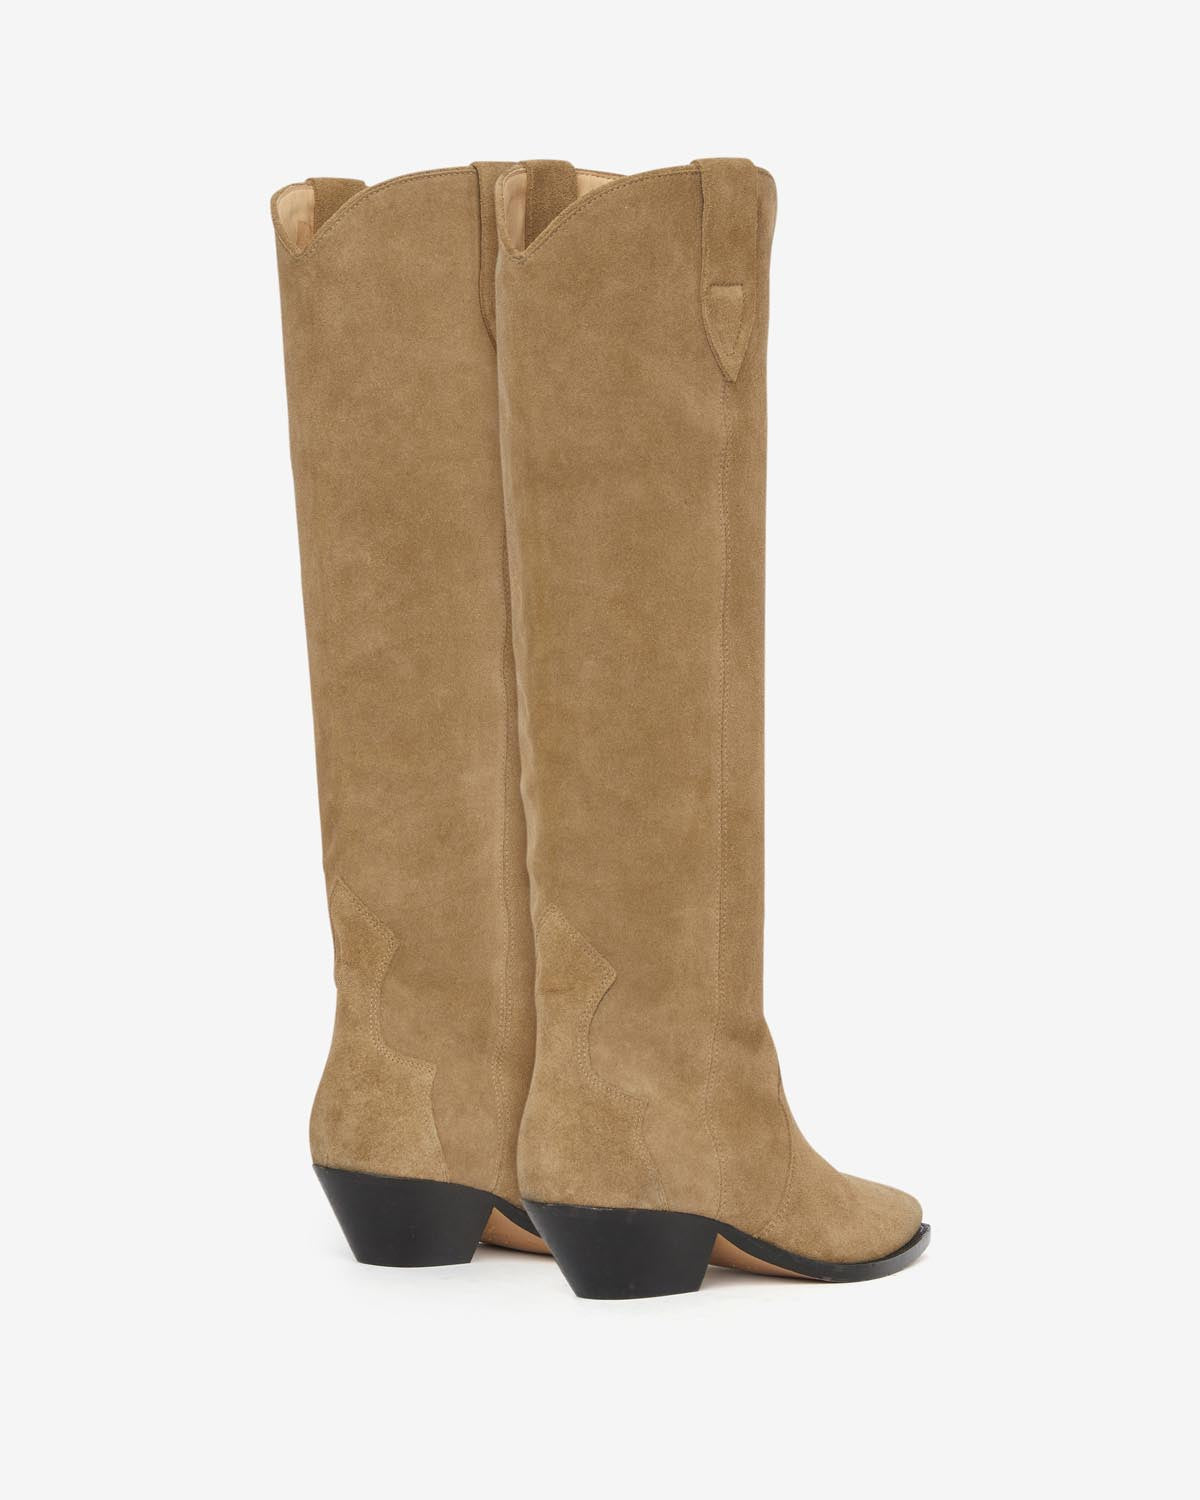 Denvee boots Woman Taupe 5